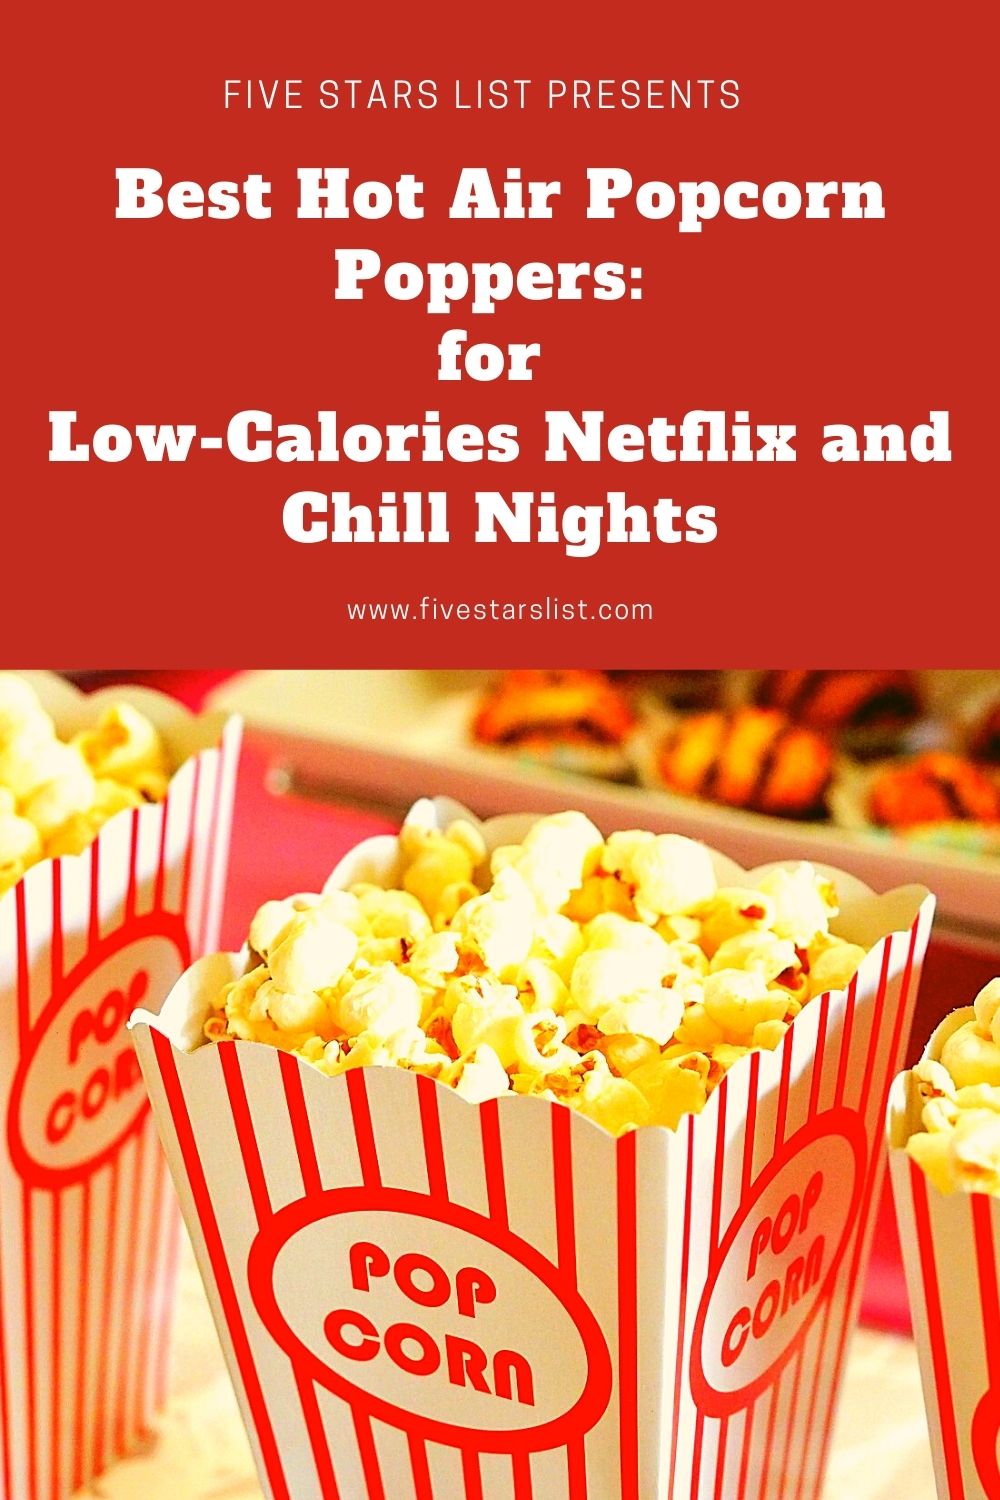 Best Hot Air Popcorn Poppers: for Low-Calories Netflix and Chill Nights